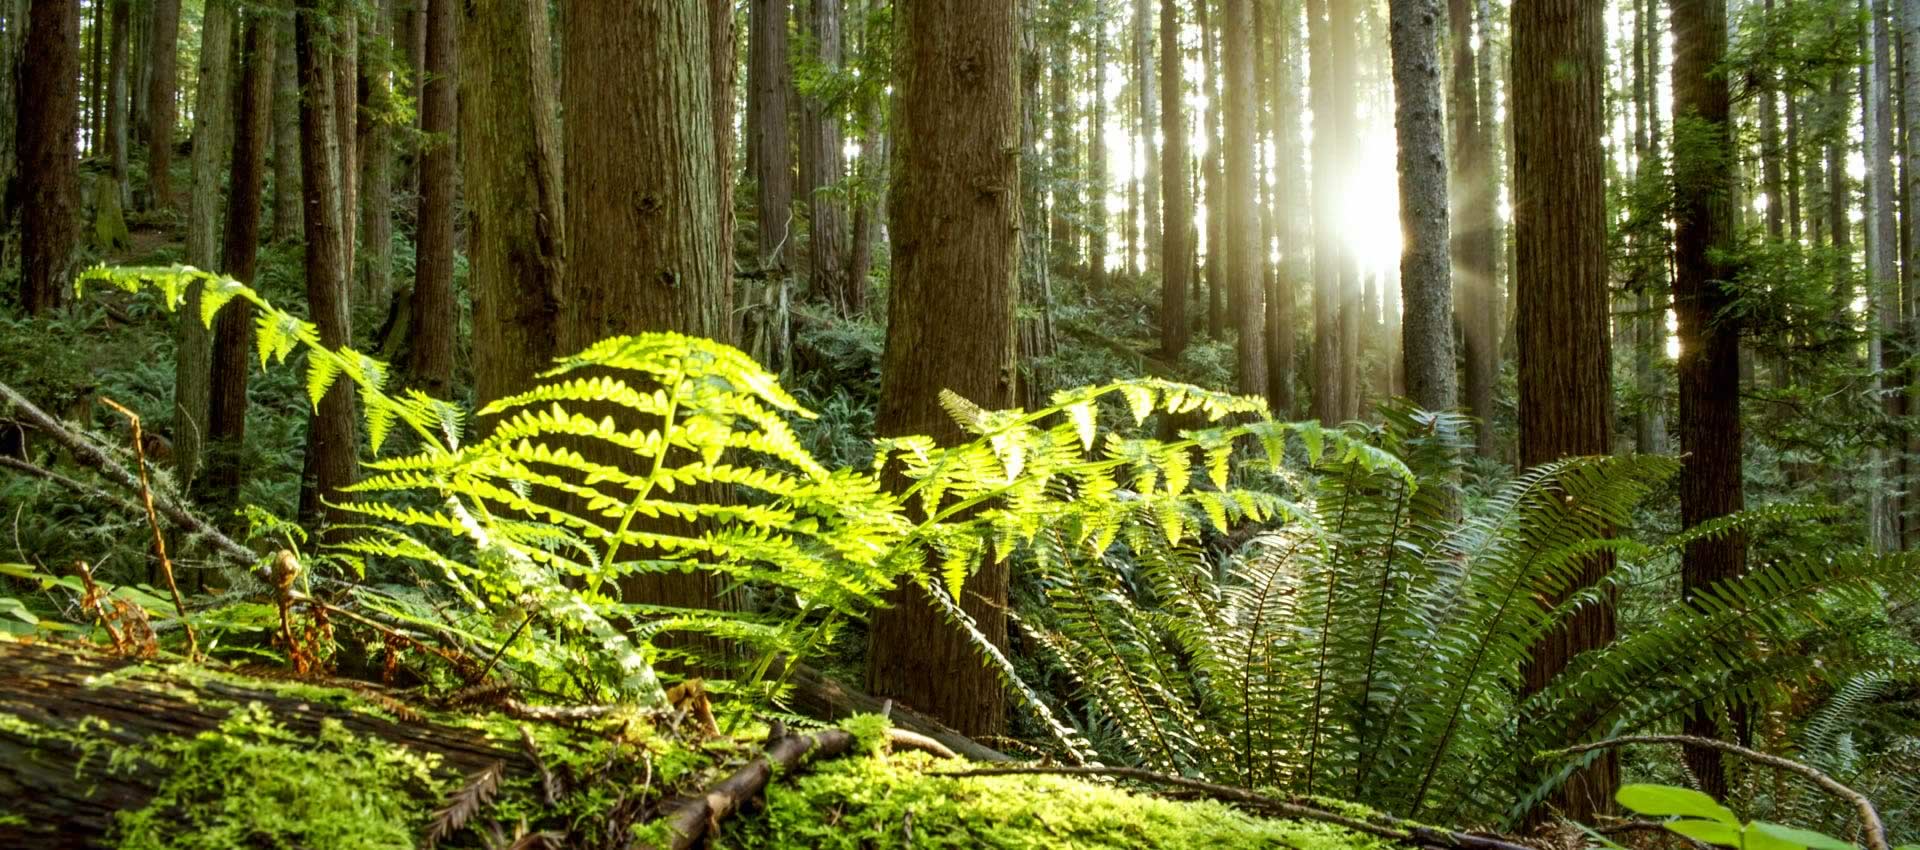 redwood forest and ferns